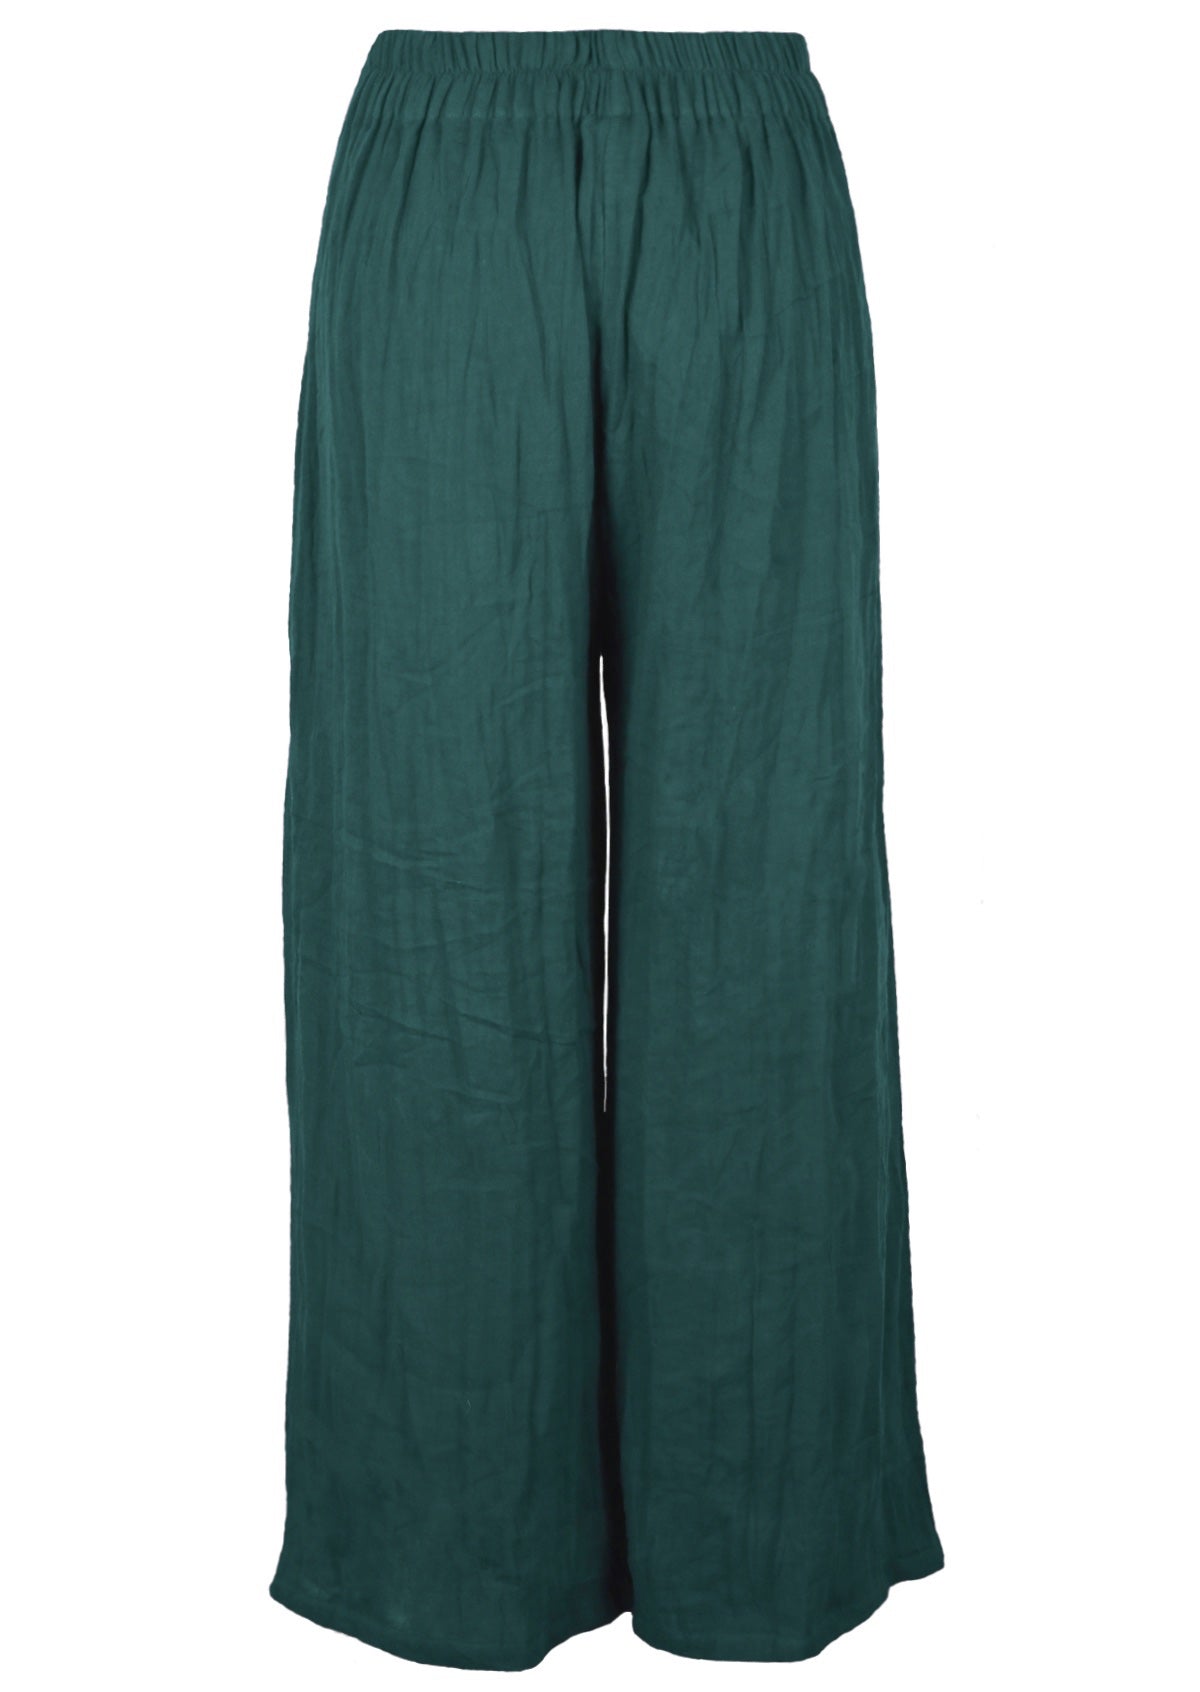 Elastic at the back of the waistband makes for super comfort in these lightweight cotton pants